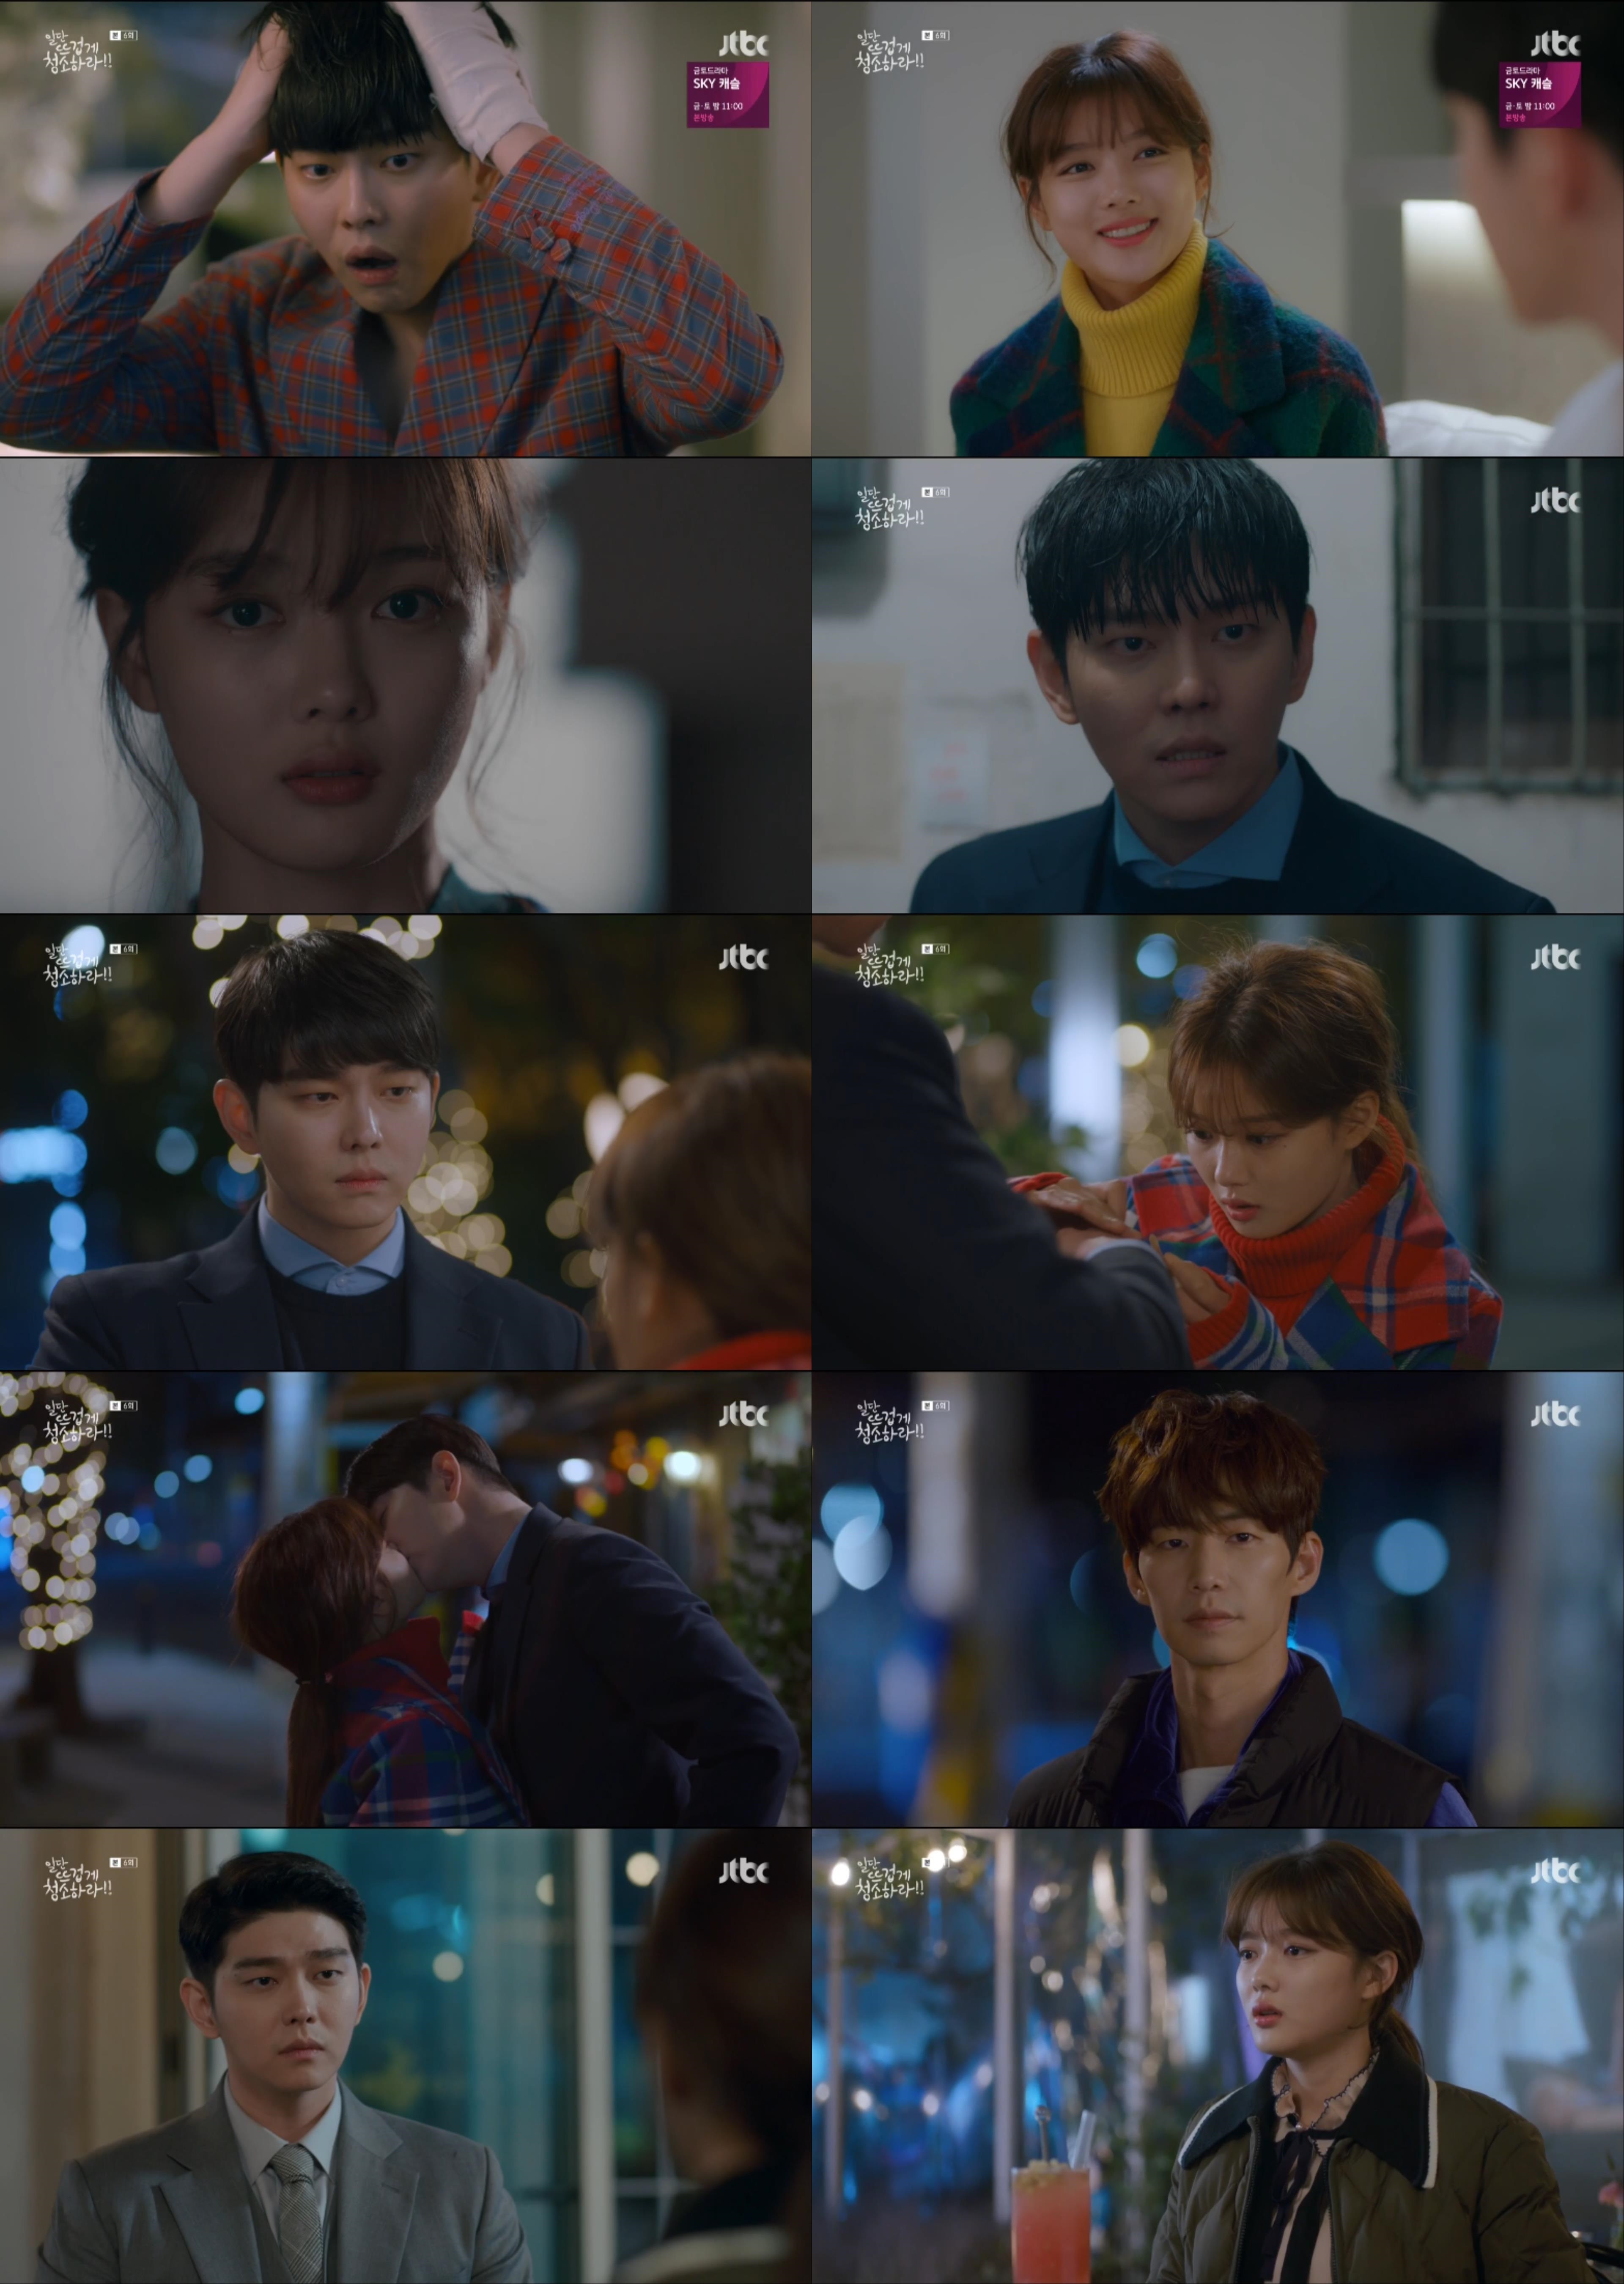 Once you clean up hot, Yoon Kyun-sang finally realized Love.In the 6th JTBC monthly drama Once Clean Hot (director Noh Jong-chan, playwright Han Hee-jung, production drama house, and Oh Hyung-je), which aired on the 11th, Sun-Jin (Yoon Kyun-sang) and Osol (Kim Yoo-jung) confirmed their sincerity toward each other with their second kiss and presented Simkung moment.Osol went home with a boiled soup for the sake of his pre-emption to save himself.In the awkward air that was placed alone in one space, the presiding apologized for the spray incident that was in the daytime, and Osol, who learned about the presiding of the presiding through the cleaning fairy staff and Kwon secretary (Yoo Seon-min), comforted him with the words I look exceptional and Is there a reason for each?It was the moment when the relationship between the two people, who had been constantly twisted into misunderstandings, became warm in understanding.The event that brought about a decisive change to the two men who were close to one step, Osol was alone in cleaning up the business trip, a male customers home in an old multi-family house.With an unknowing tension in the dim house atmosphere somewhere, the presiding learned that the place where Osol went on a business trip was the home of a blacklist customer who had had two sexual harassment cases in the past.The anxious pre-emption ran straight through the rain to save the osole, barely avoiding the moment of crisis, but the hand of the pre-emption had a small wound.The presupposition to Osols hand, which was applying the medicine, convinced him that his Feeling was Love, and that it was all clear, and there was nothing to fear.The figure of the first step of hugging and kissing the osole at once raised the thrilling index to its peak.After a sudden kiss of pre-emption, Osols sickness began, but the pink excitement also began to cool the Osol again for a moment.The kiss of the day was sincere, but the prescient turned away from his own Feeling. In fact, the prescient had pain.Love and Love were all negative things for the first time that I grew up watching my lovers who met my mother Cha Mae-hwa (Kim Hye-eun).In the end, Osol, who first talked about the kiss of the day, turned to Osol, saying, Did you expect a word?The first thing that hurt Osol more because of his wounds. The relationship between the two people, which had been broken again, was sad.On the other hand, Chois bitter expression (Song Jae-rim), who watched the kiss of the prestige and the osole at a distance, raised expectations for triangular romance.Chois complex subtle expression, which learned about the relationship between Seon-gyeol and Cha (Ahn Seok-hwan), also stimulated curiosity.Attention is focused on how the secret relationship of the complicated people will affect the future development.Clean it up hotly is broadcast every Monday and Tuesday at 9:30 pm on JTBC.Netizens are too cute and fresh drama through various SNS and portal sites, This is so fun.Yoon Kyun-sang is cute, Yoon Kyun-sang - Kim Yoo-jung Chemie Chan and so on.iMBC  JTBC Screen Capture